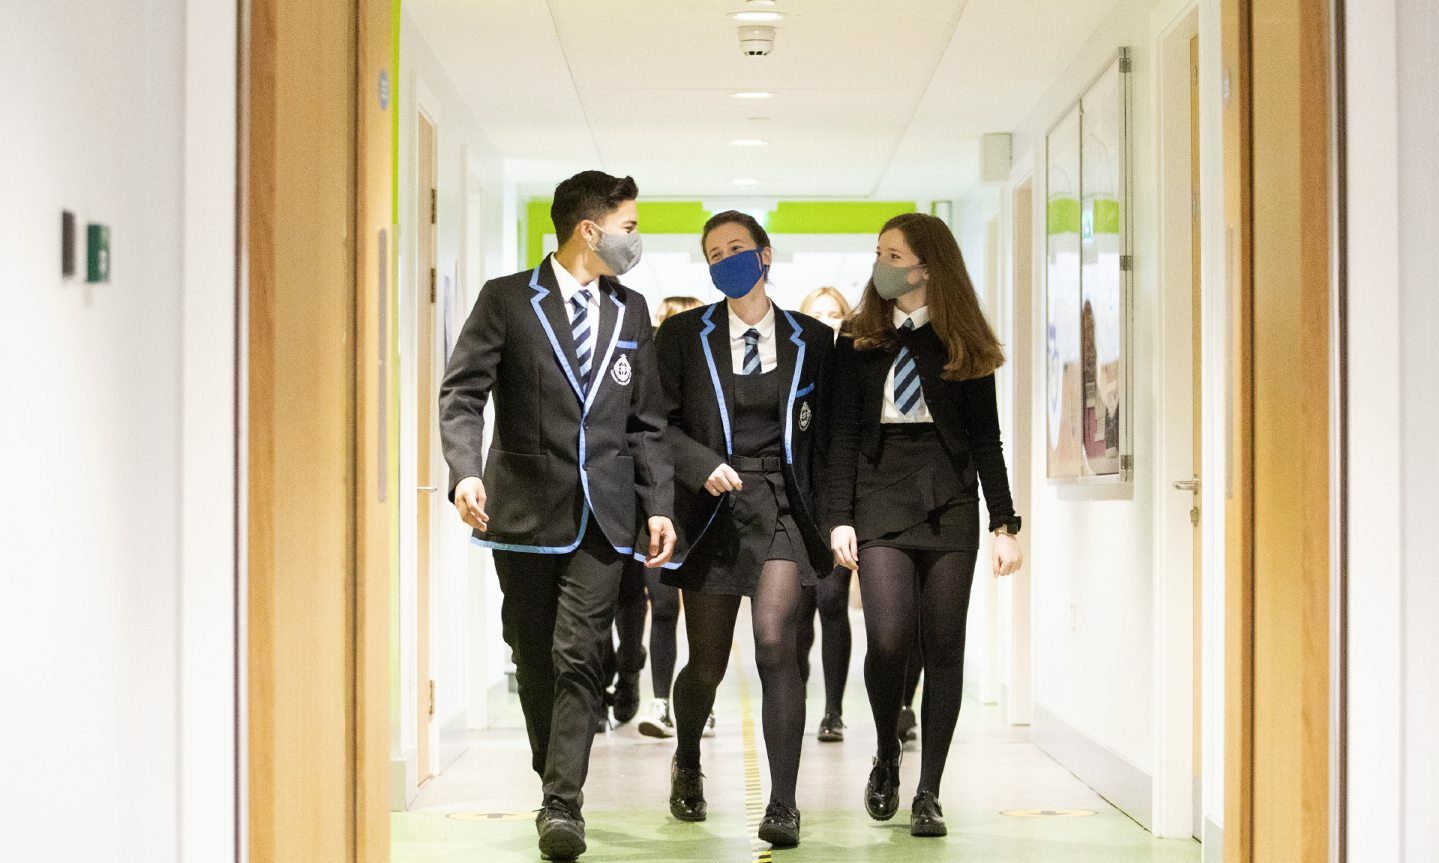 Face masks have been ditched in schools.